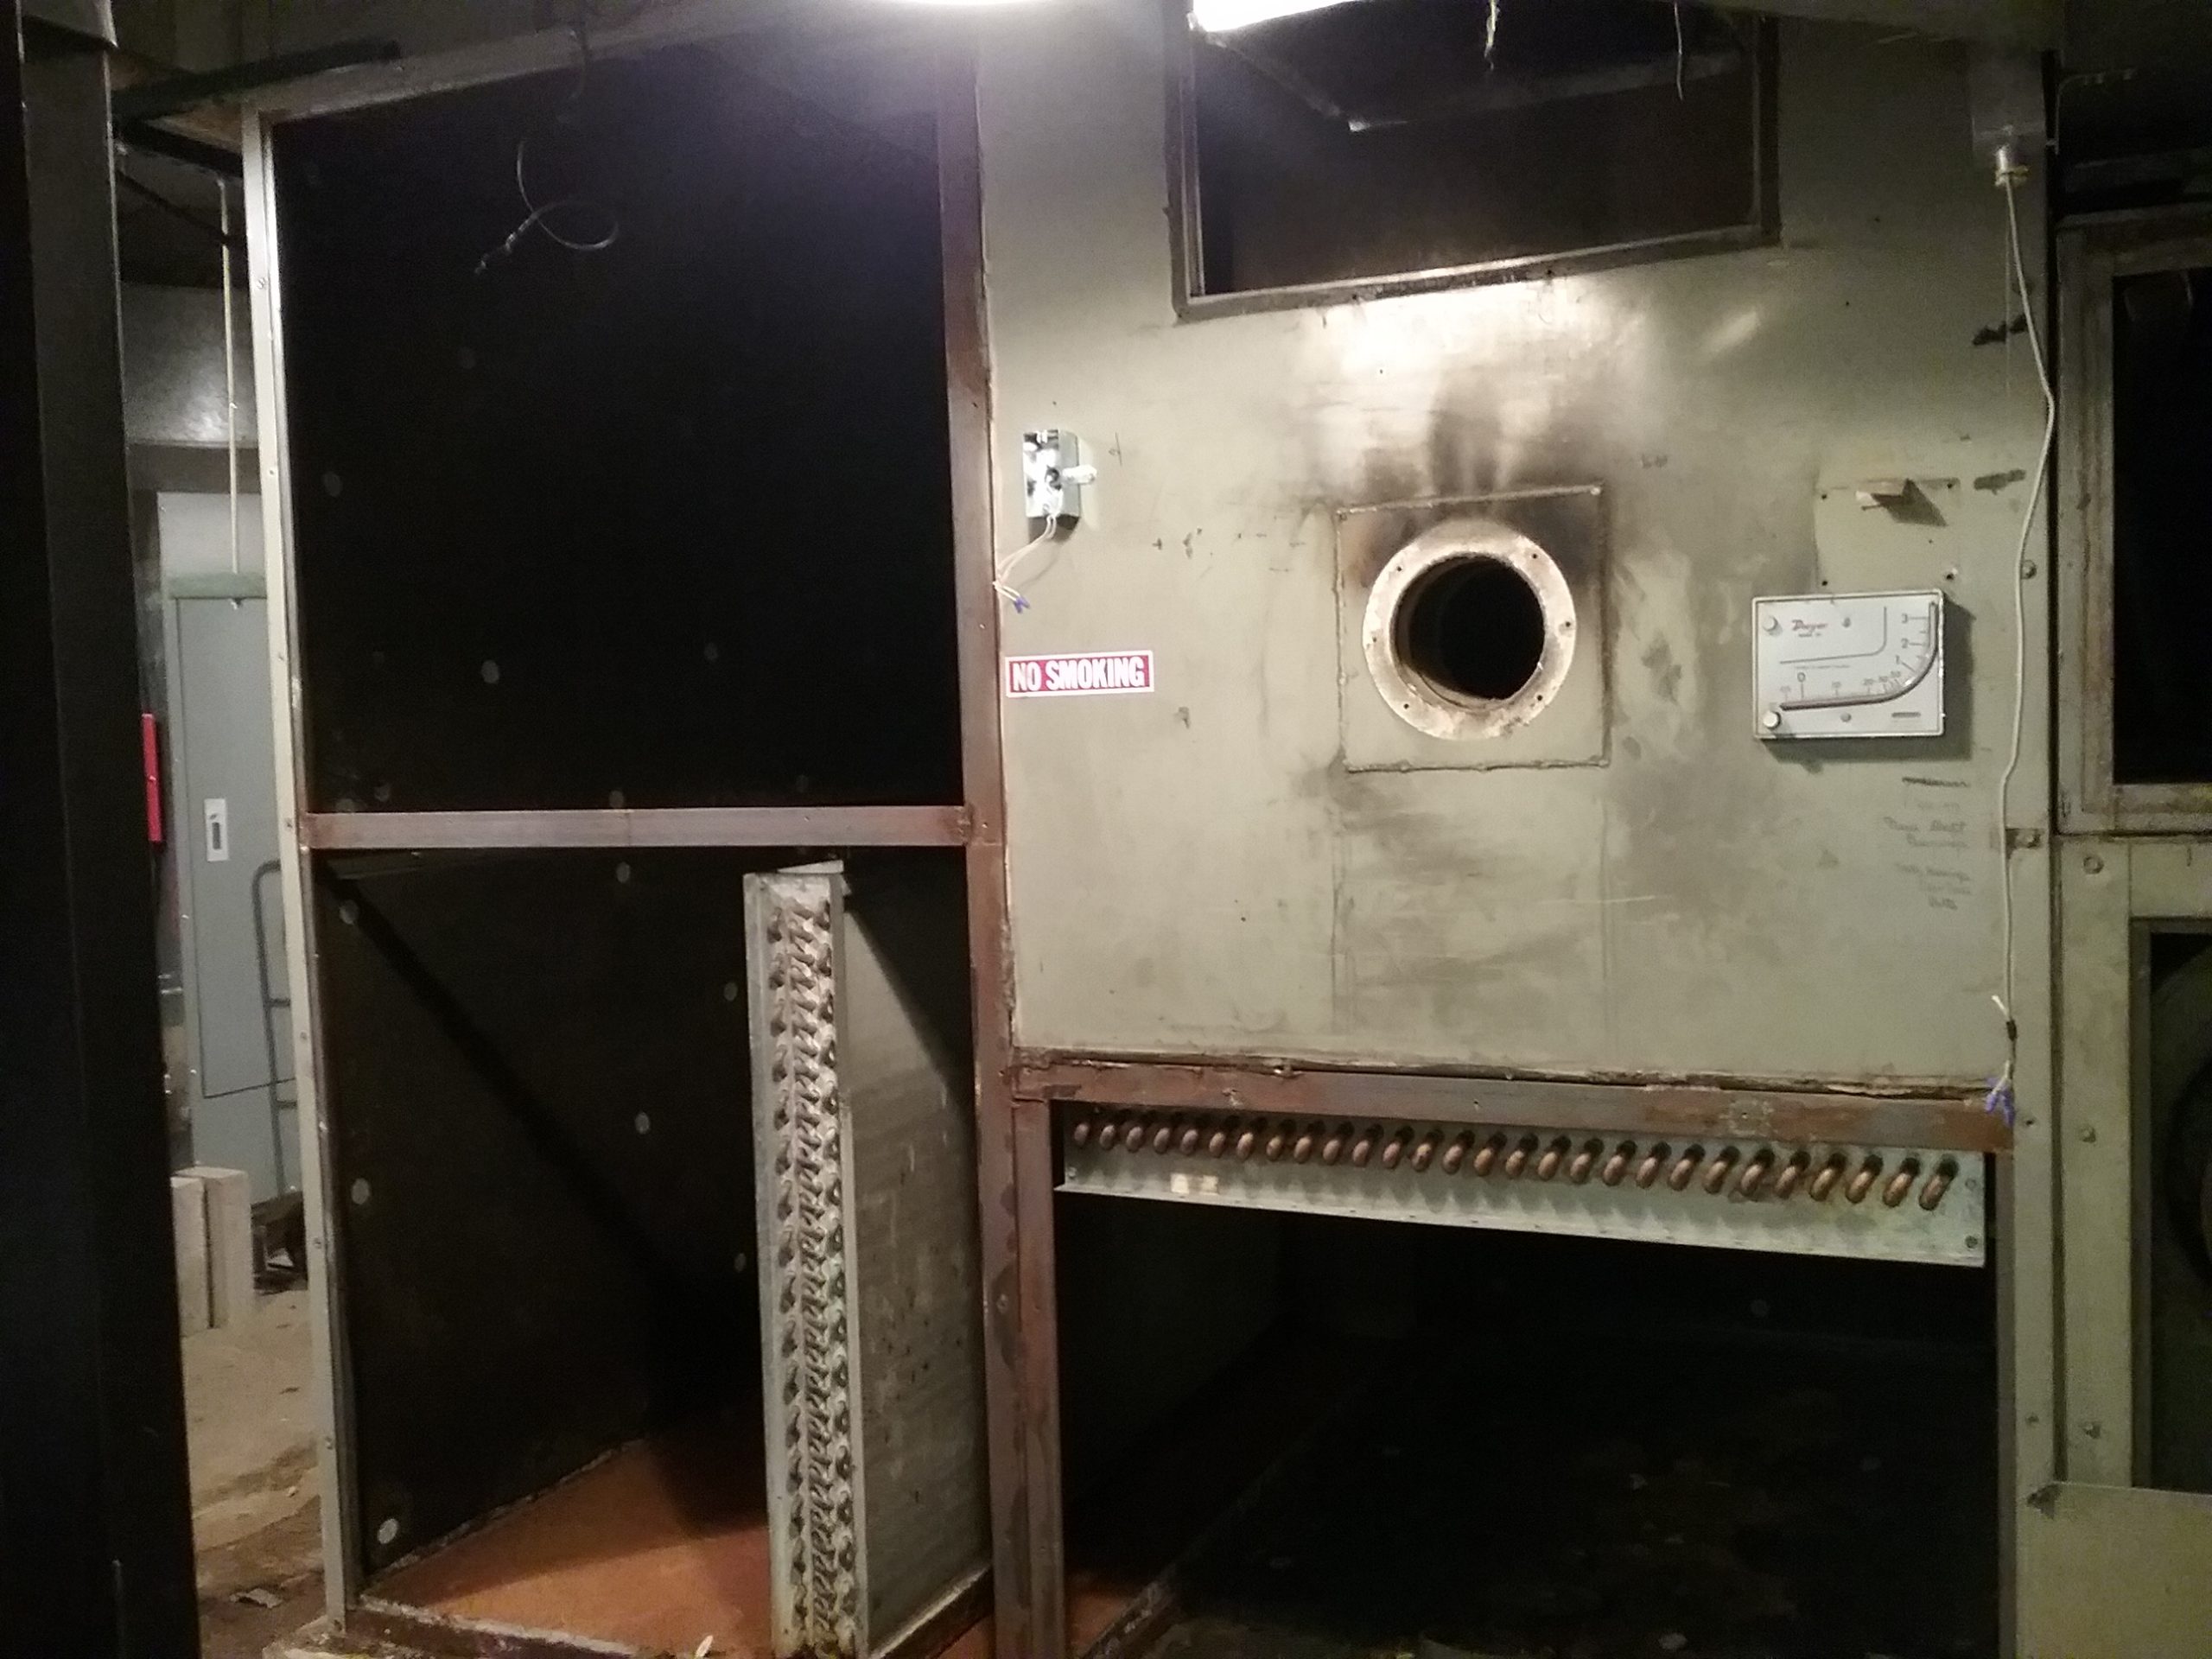 South side of the air handling unit with the control panel, humidifier, and side removed, exposing the large, dark cavities inside the air handler. Weyerhaeuser Museum, photo taken October 4, 2021.